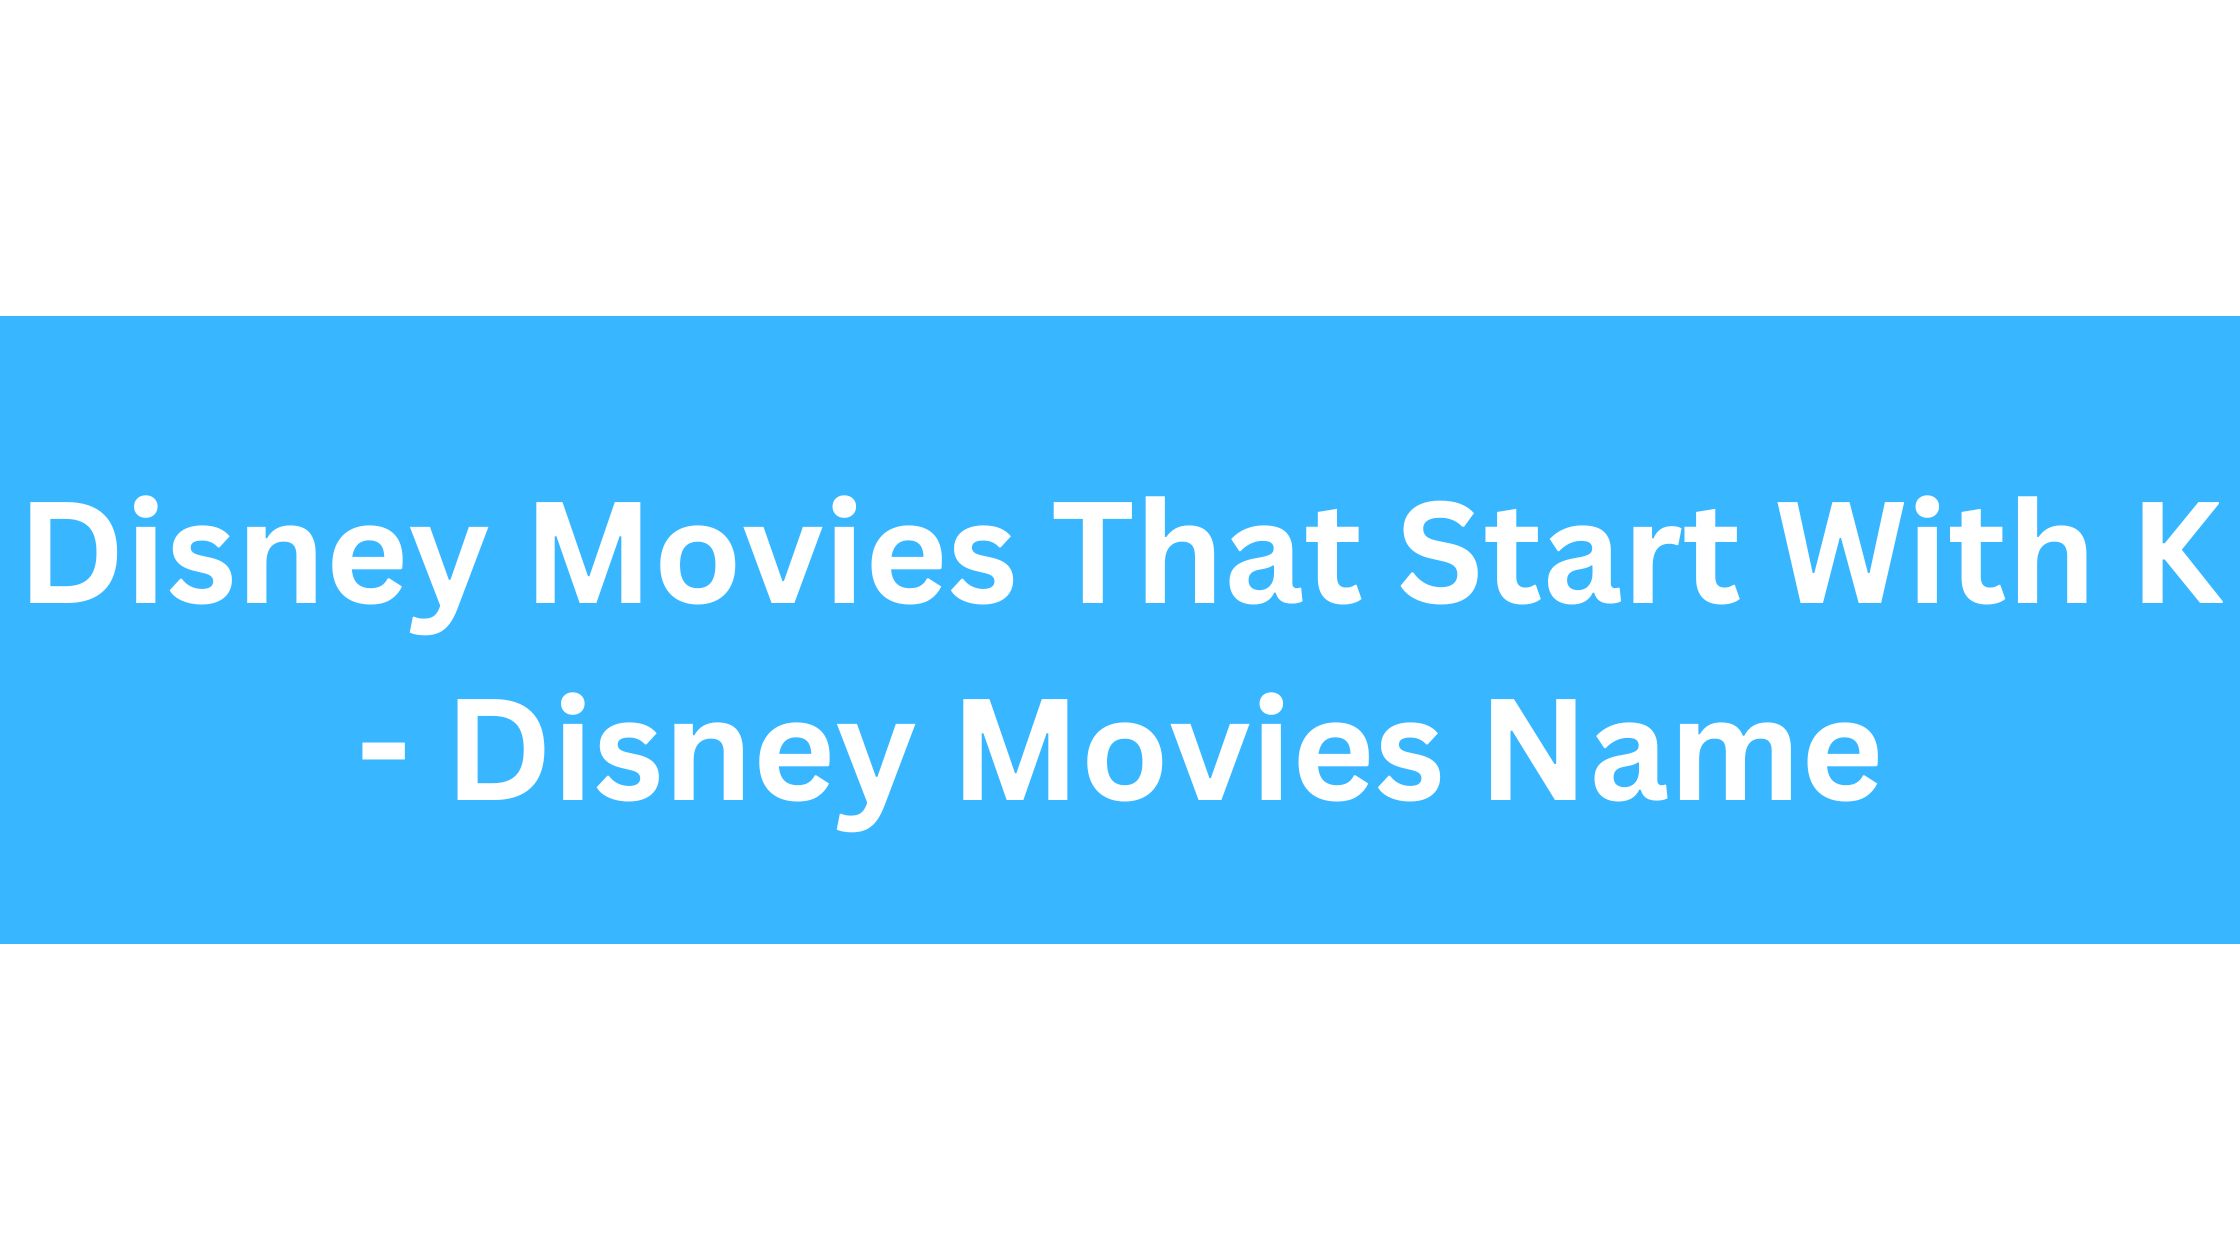 Disney Movies That Start With K